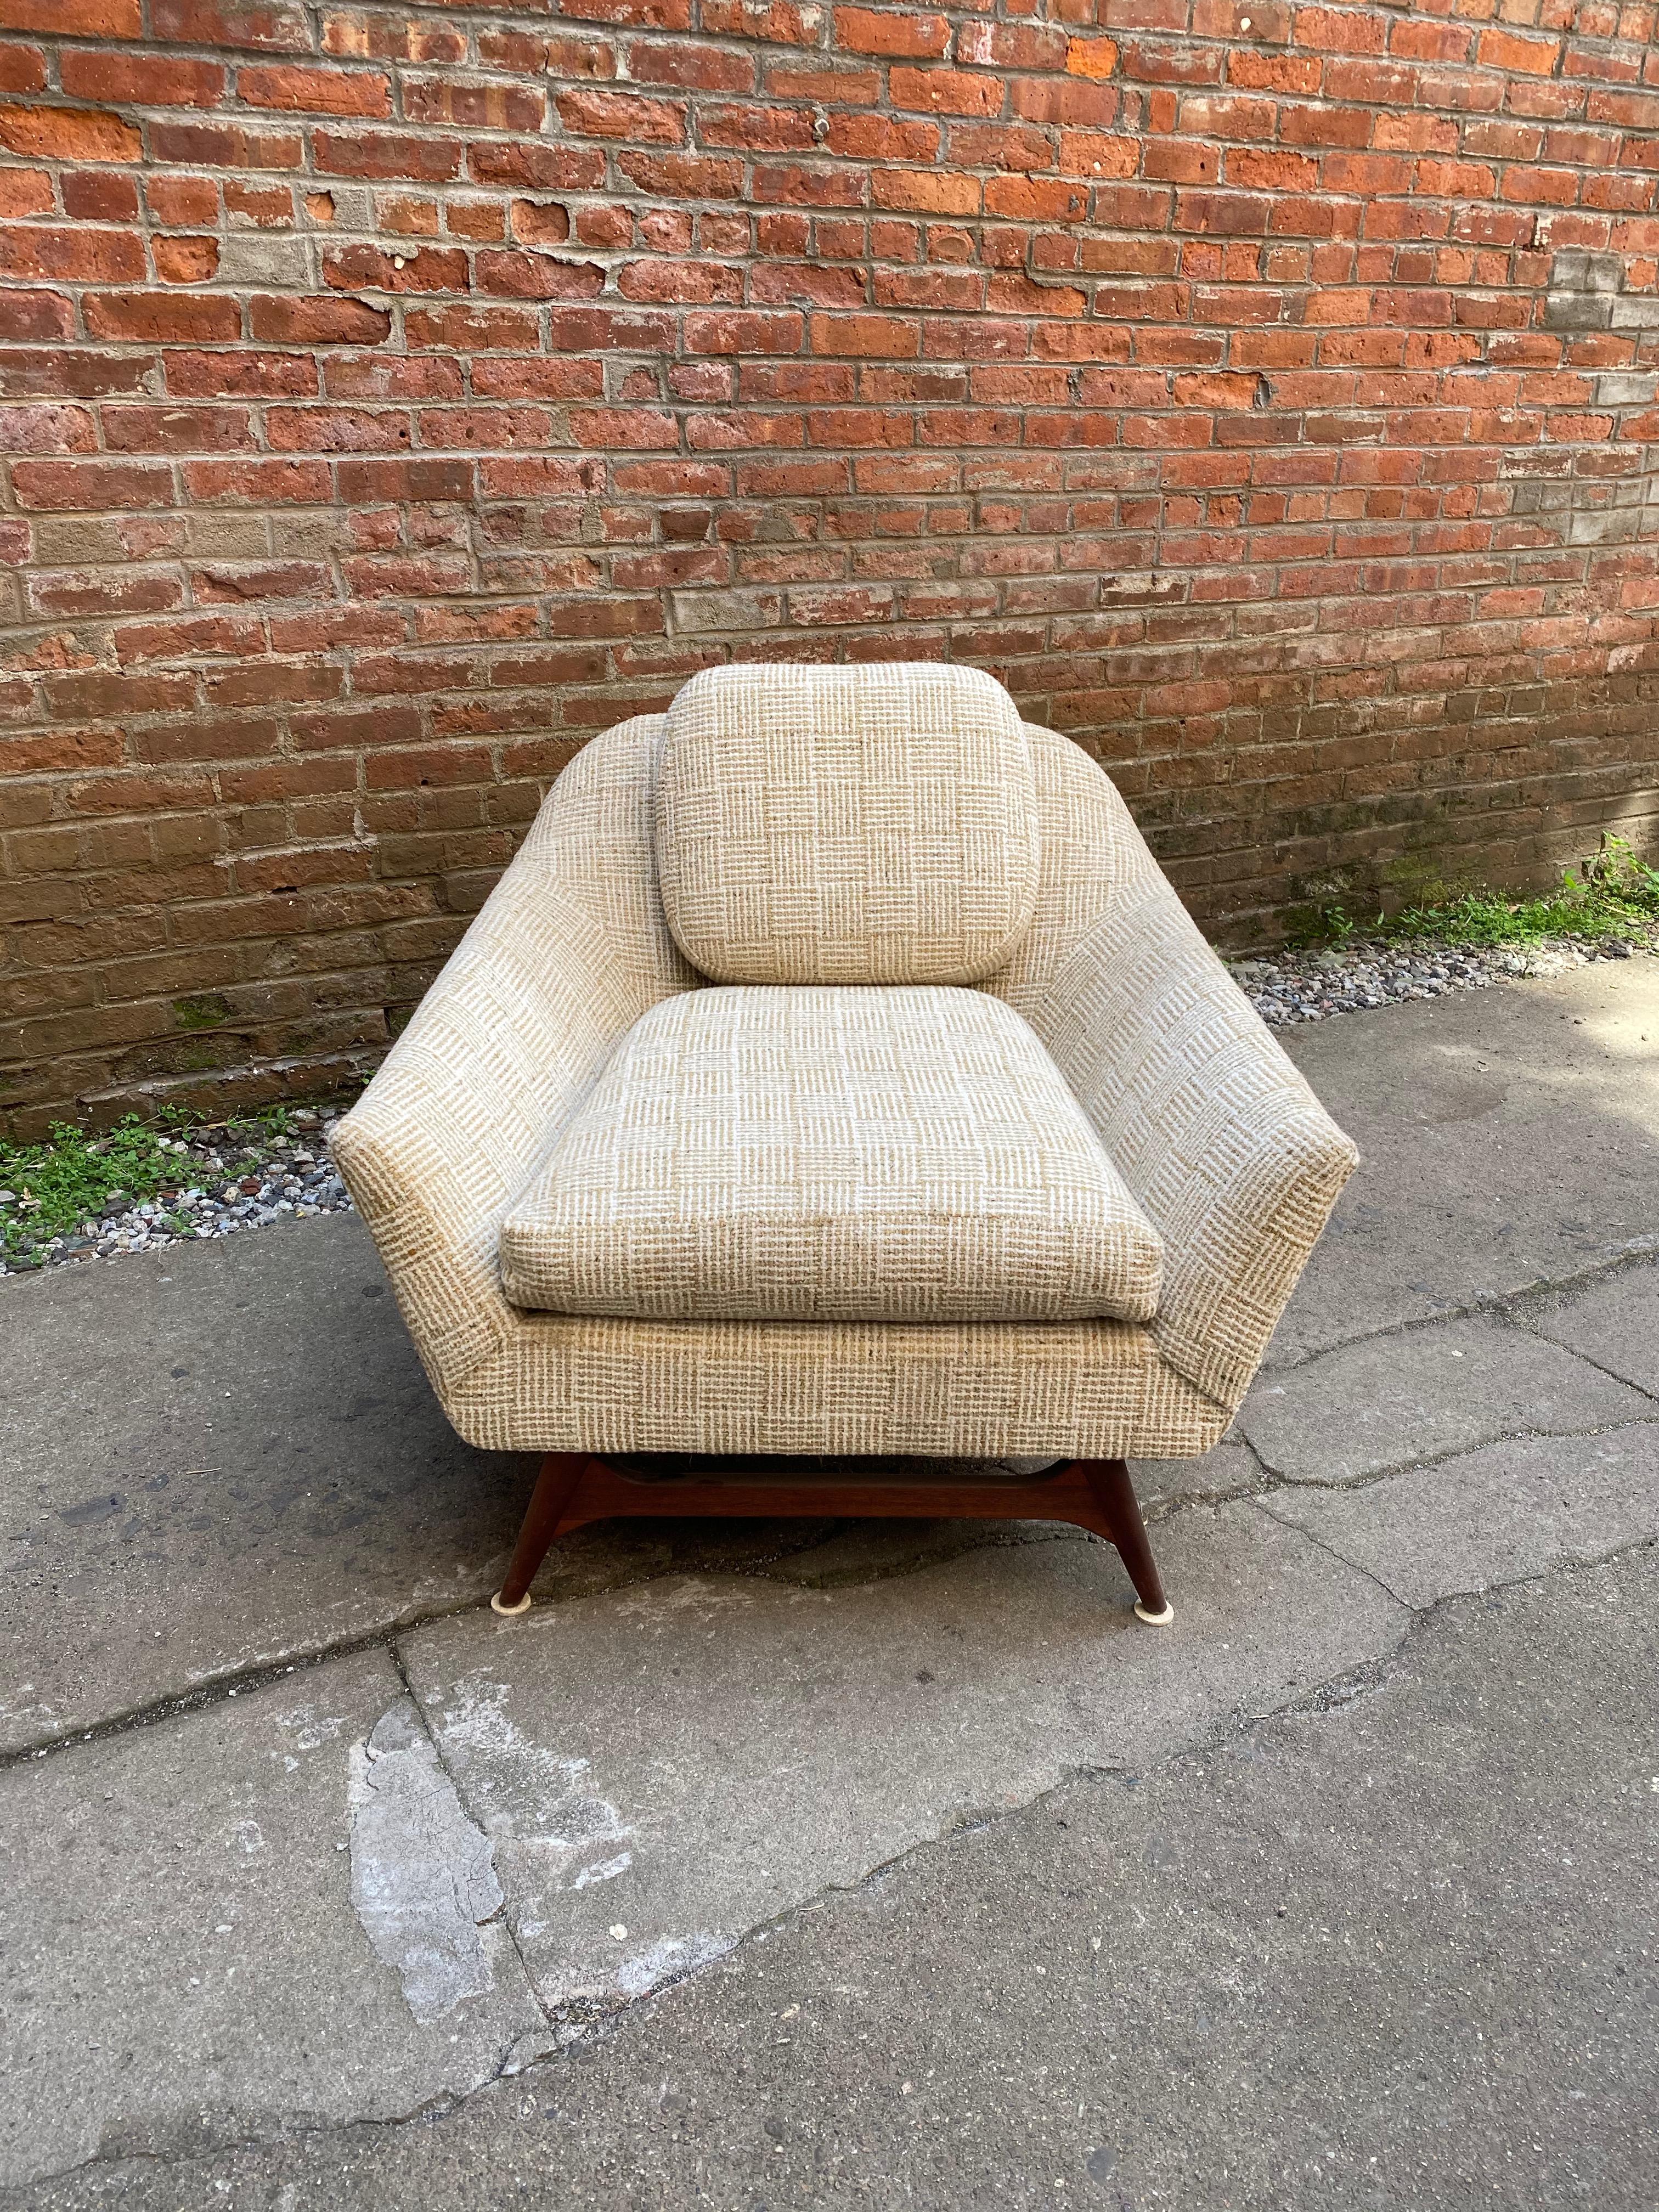 Purchased at Scandi Haus back in 1965 with one owner. This lounge chair is immaculate. Re-upholstered in the late 1970s with a highly textured neutral textile. Solid walnut flared leg with stretcher base. Built for comfort.

Measures: